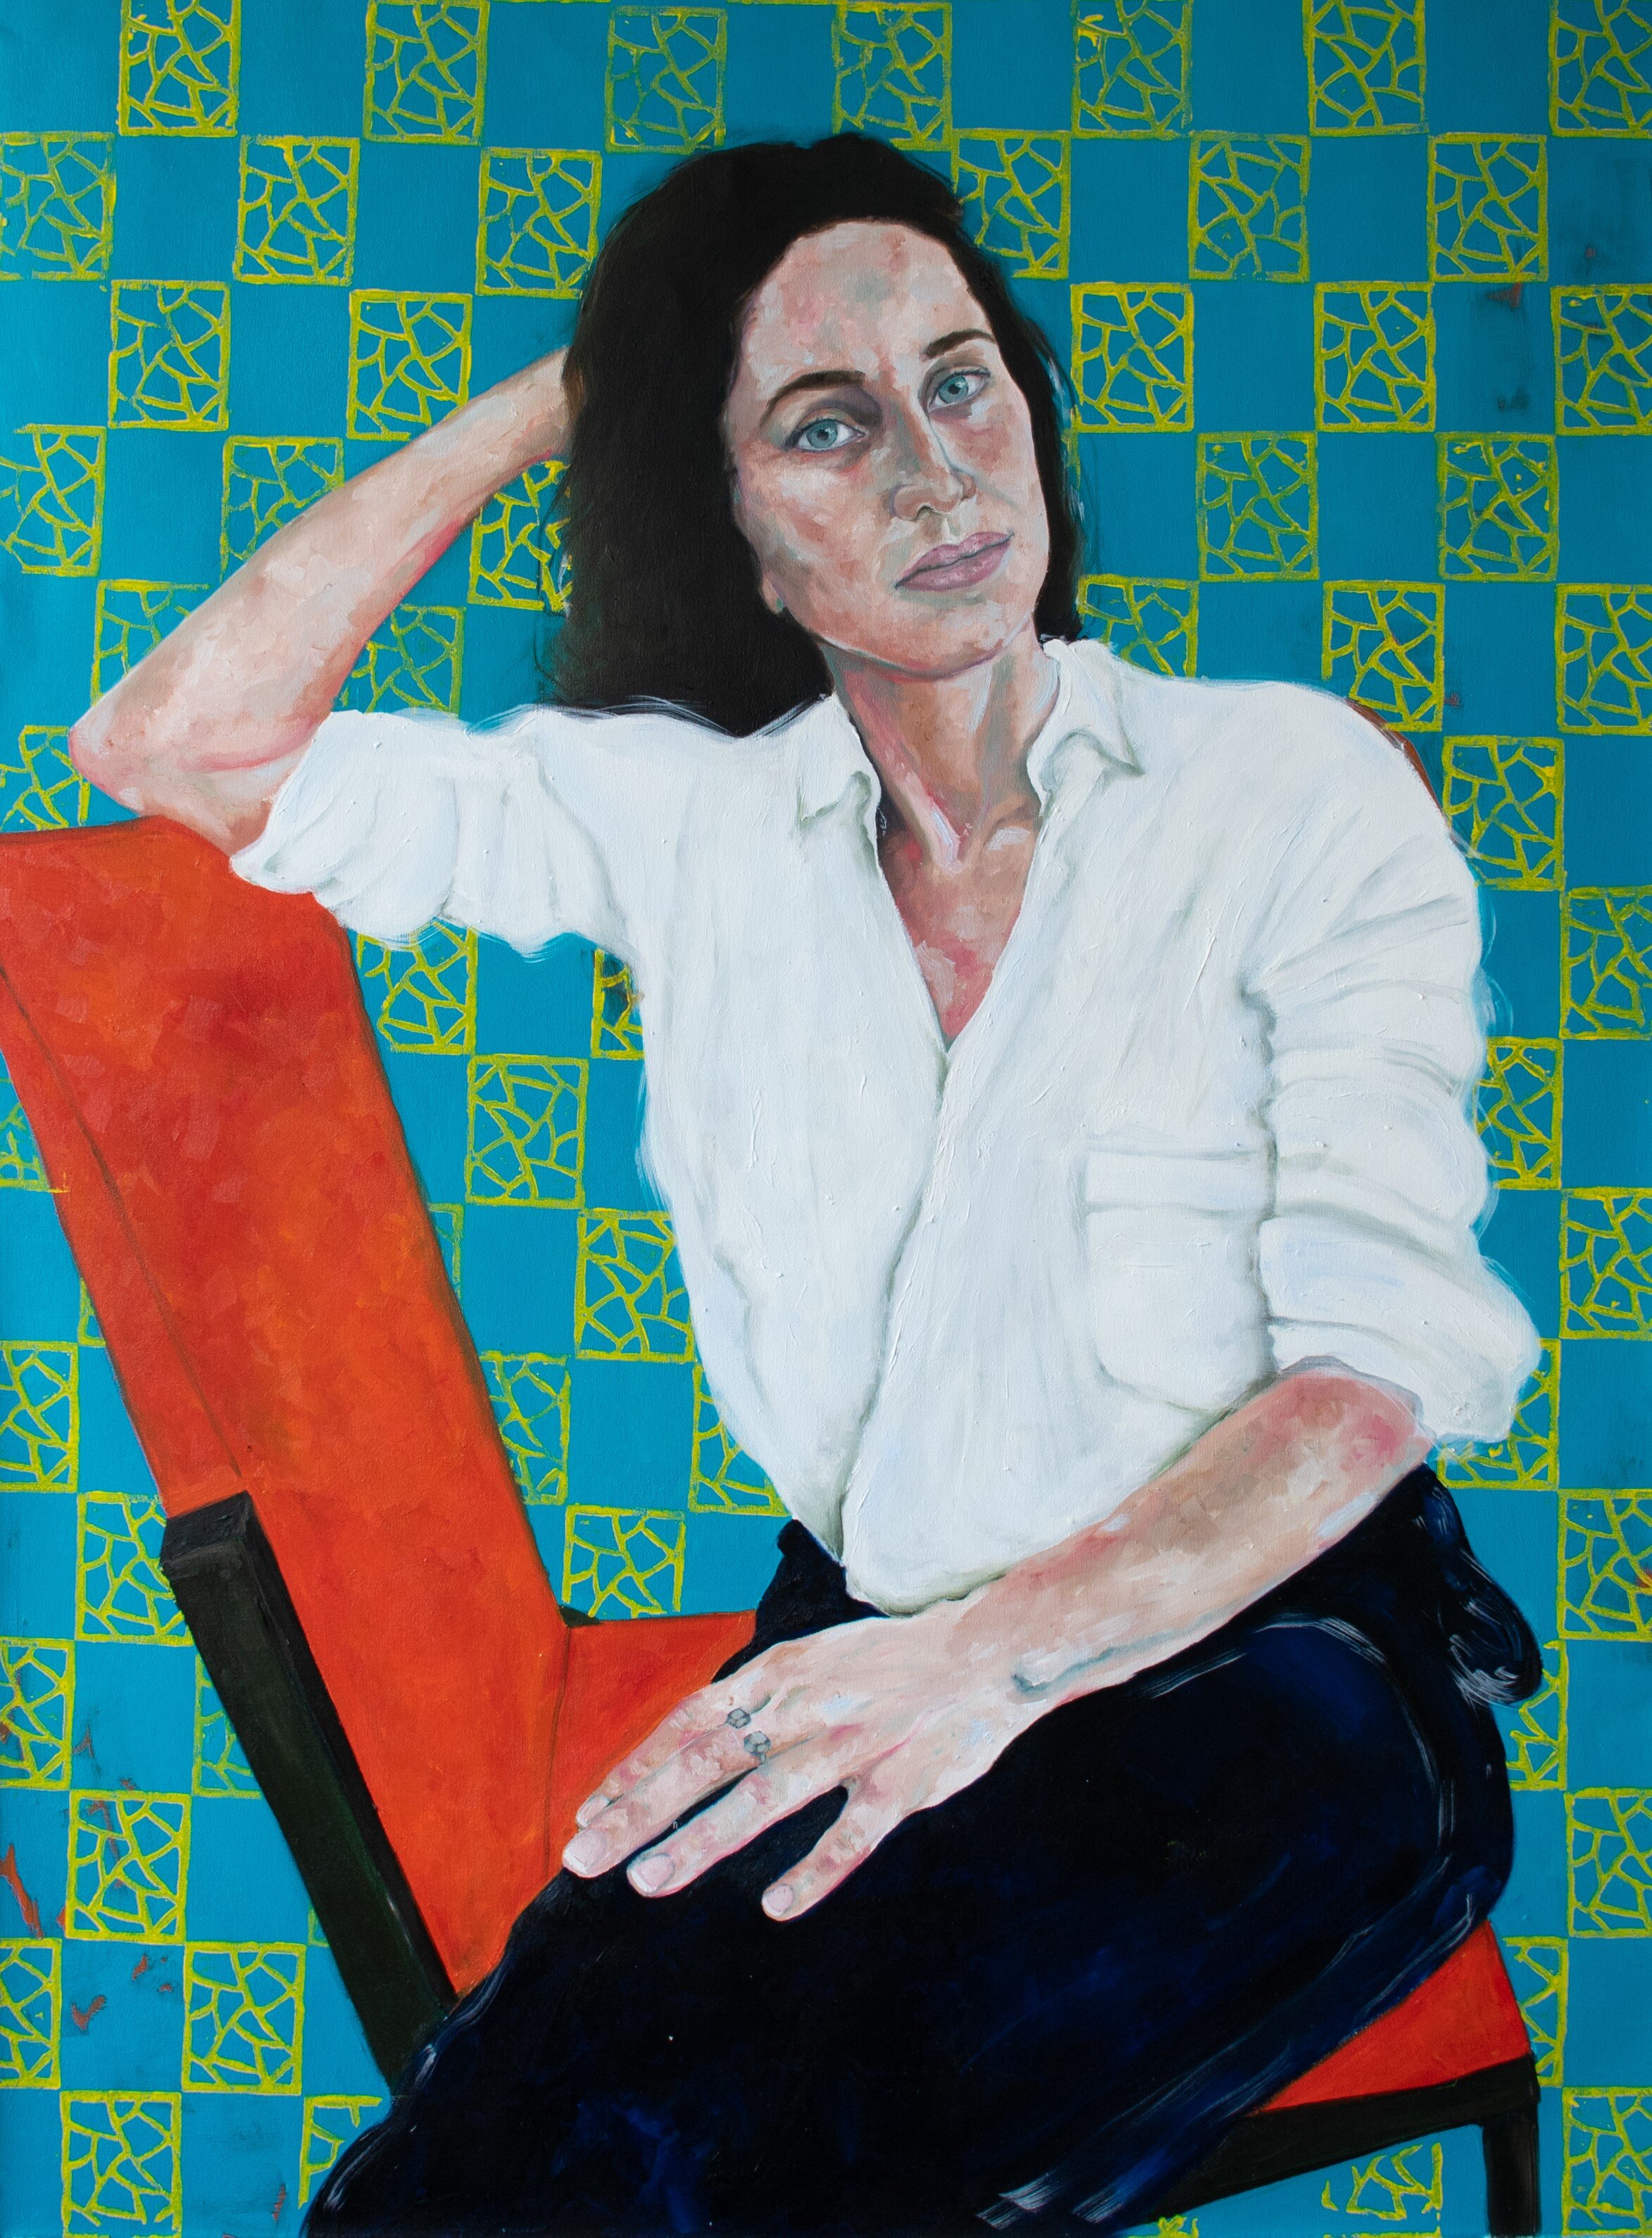 Martina, oil and block printing on canvas, 140x100 cm 2020